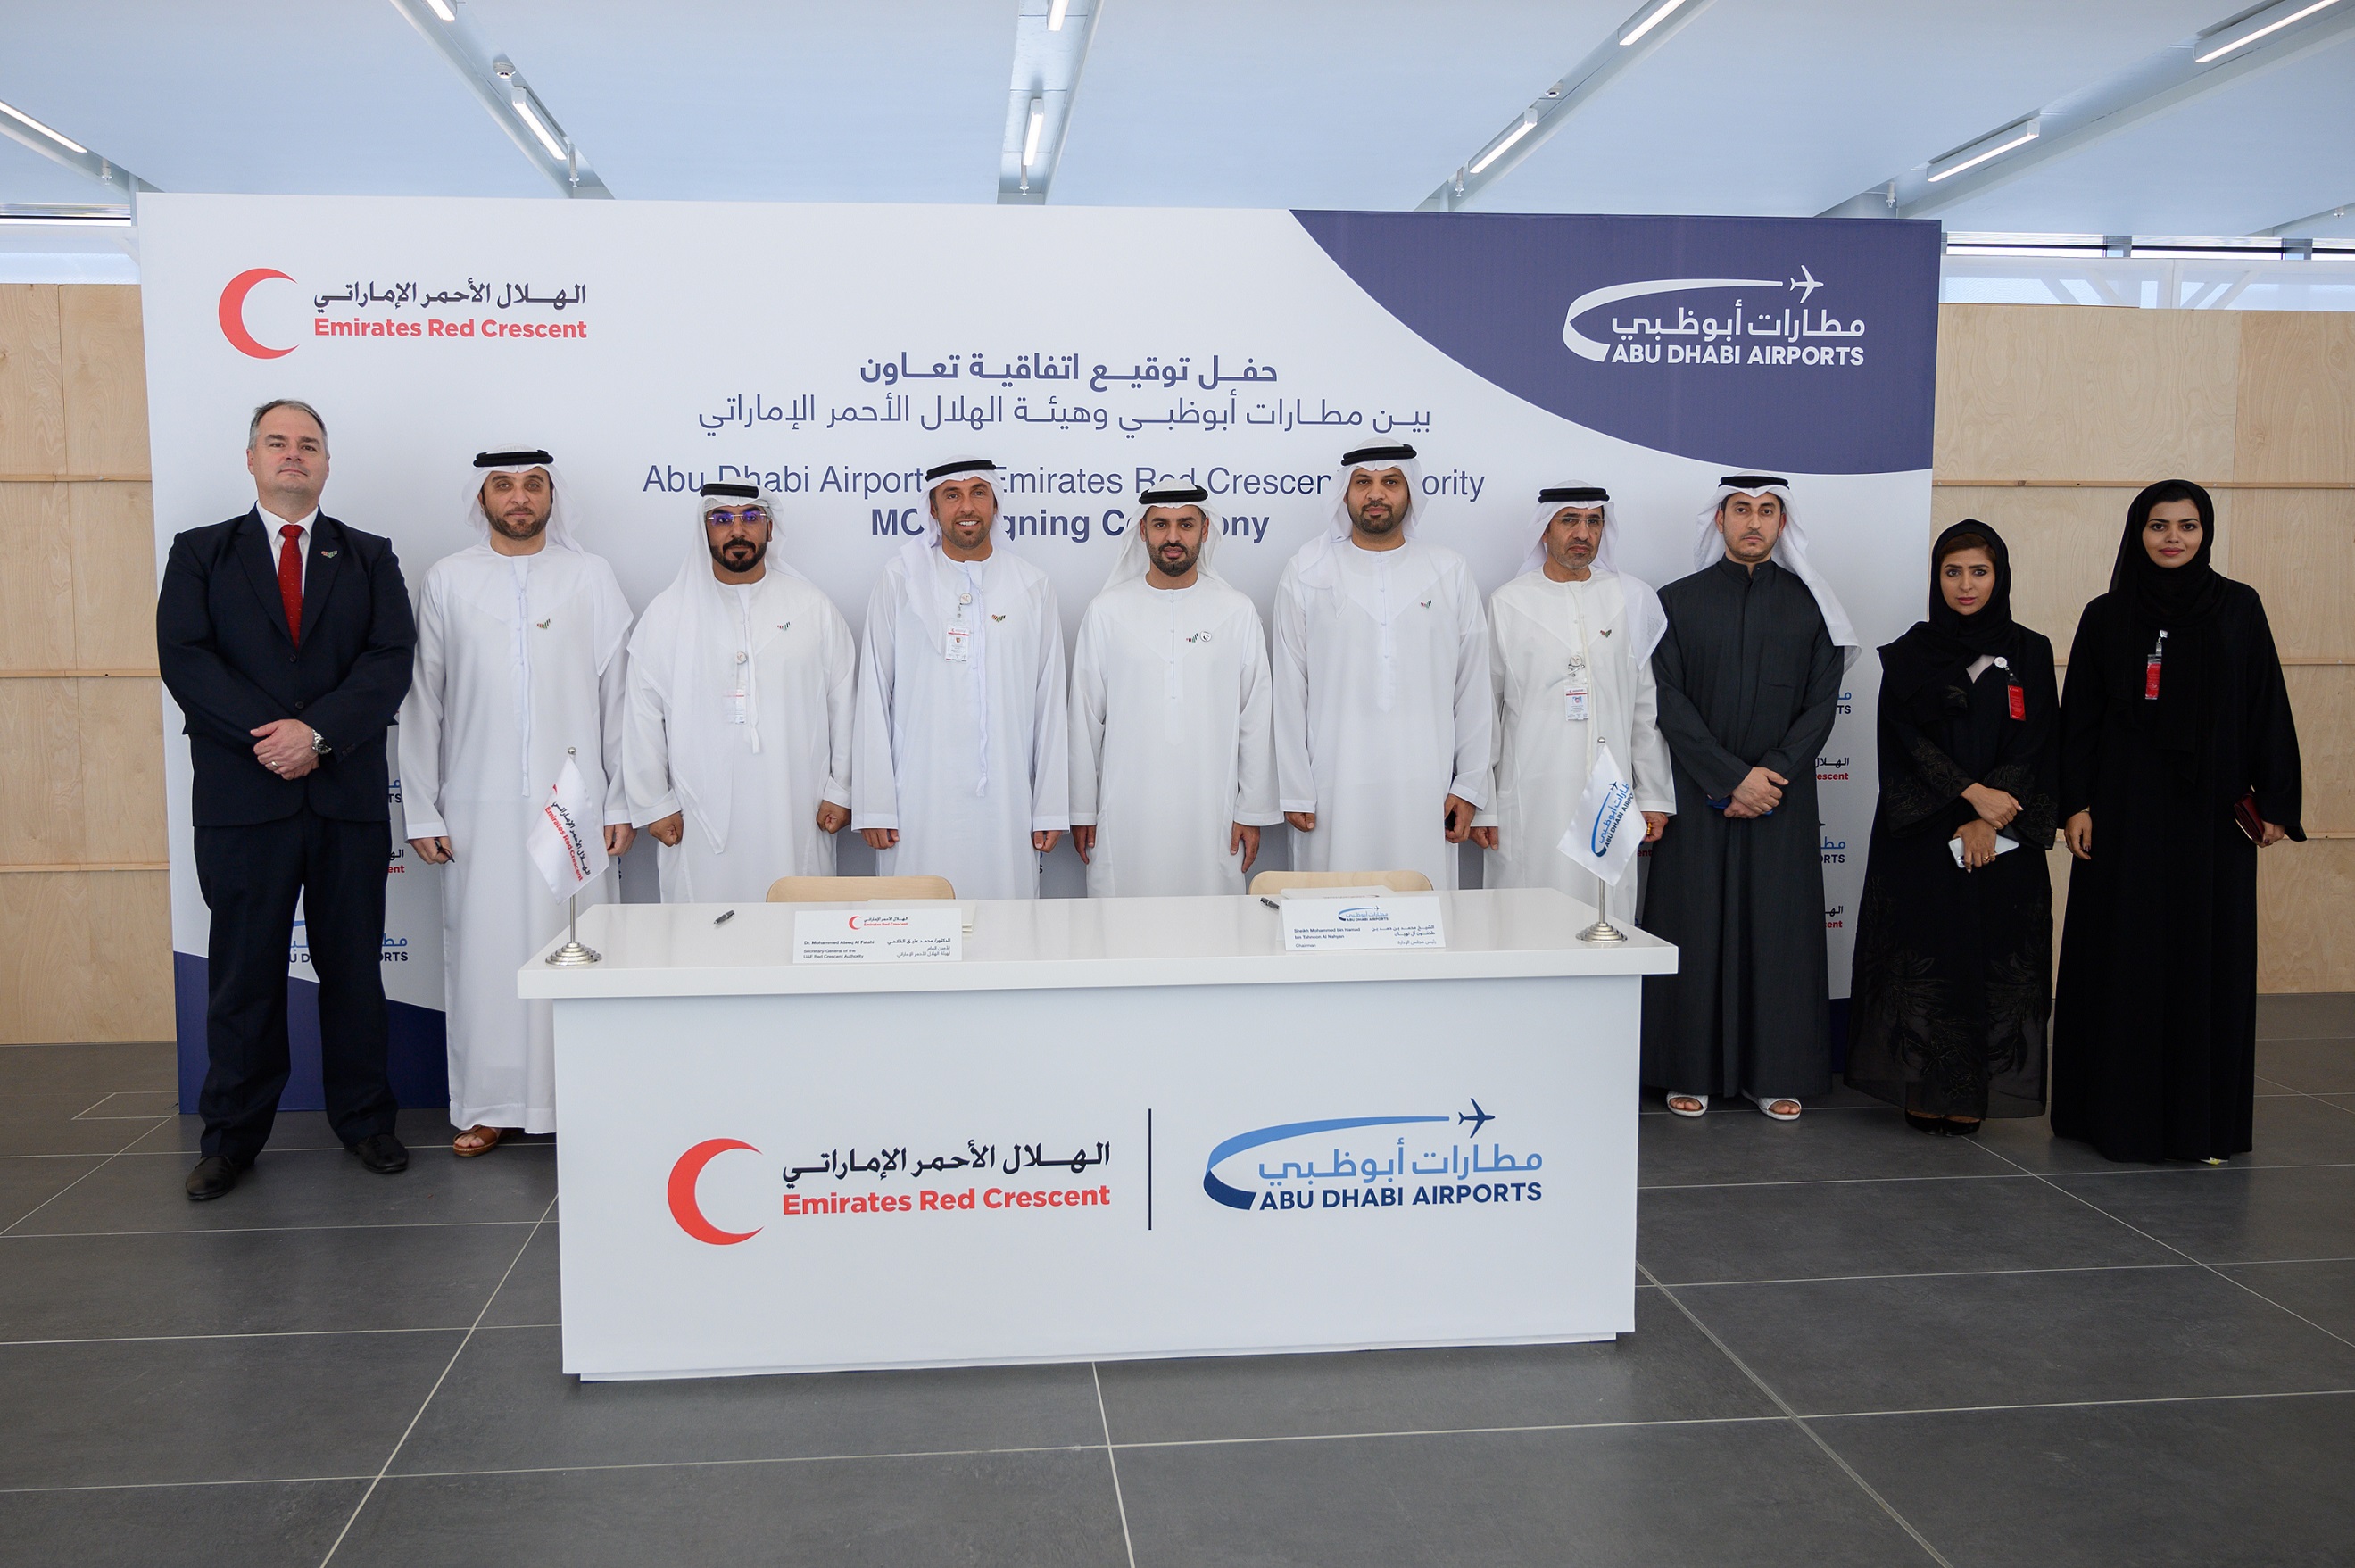 Abu Dhabi Airports And The Emirates Red Crescent Authority Sign New Agreement To Cooperate In Charitable And Humanitarian Initiatives